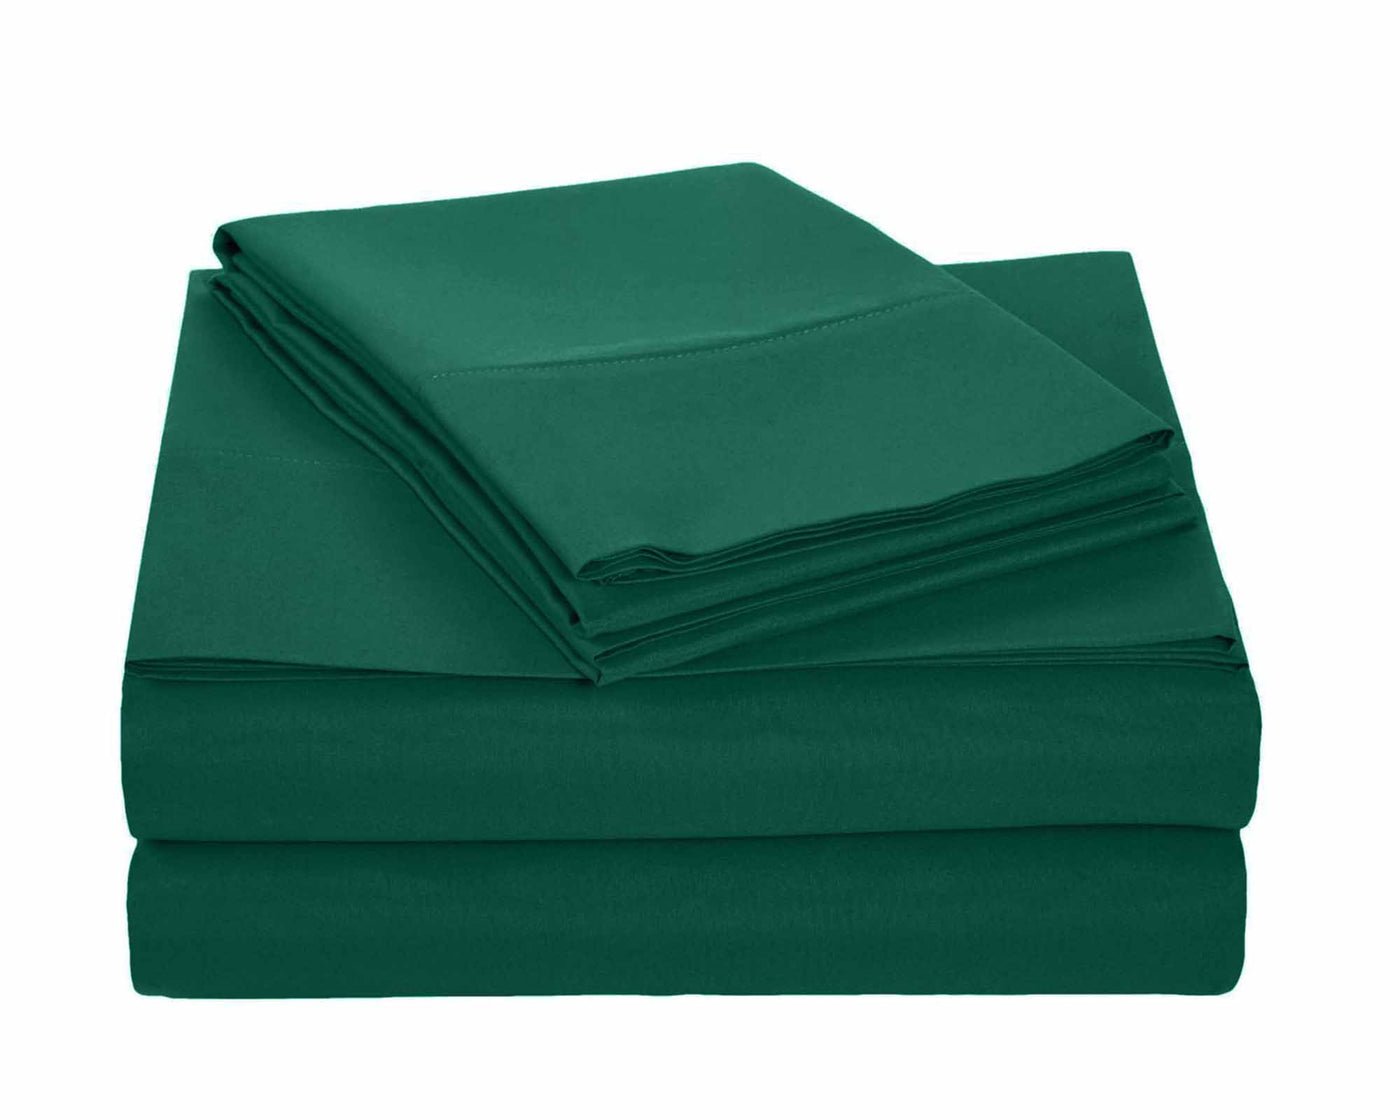 delta green sheet set included 2 pillowcases 1 fitted sheet and 1 flat sheet#colour_delta-green